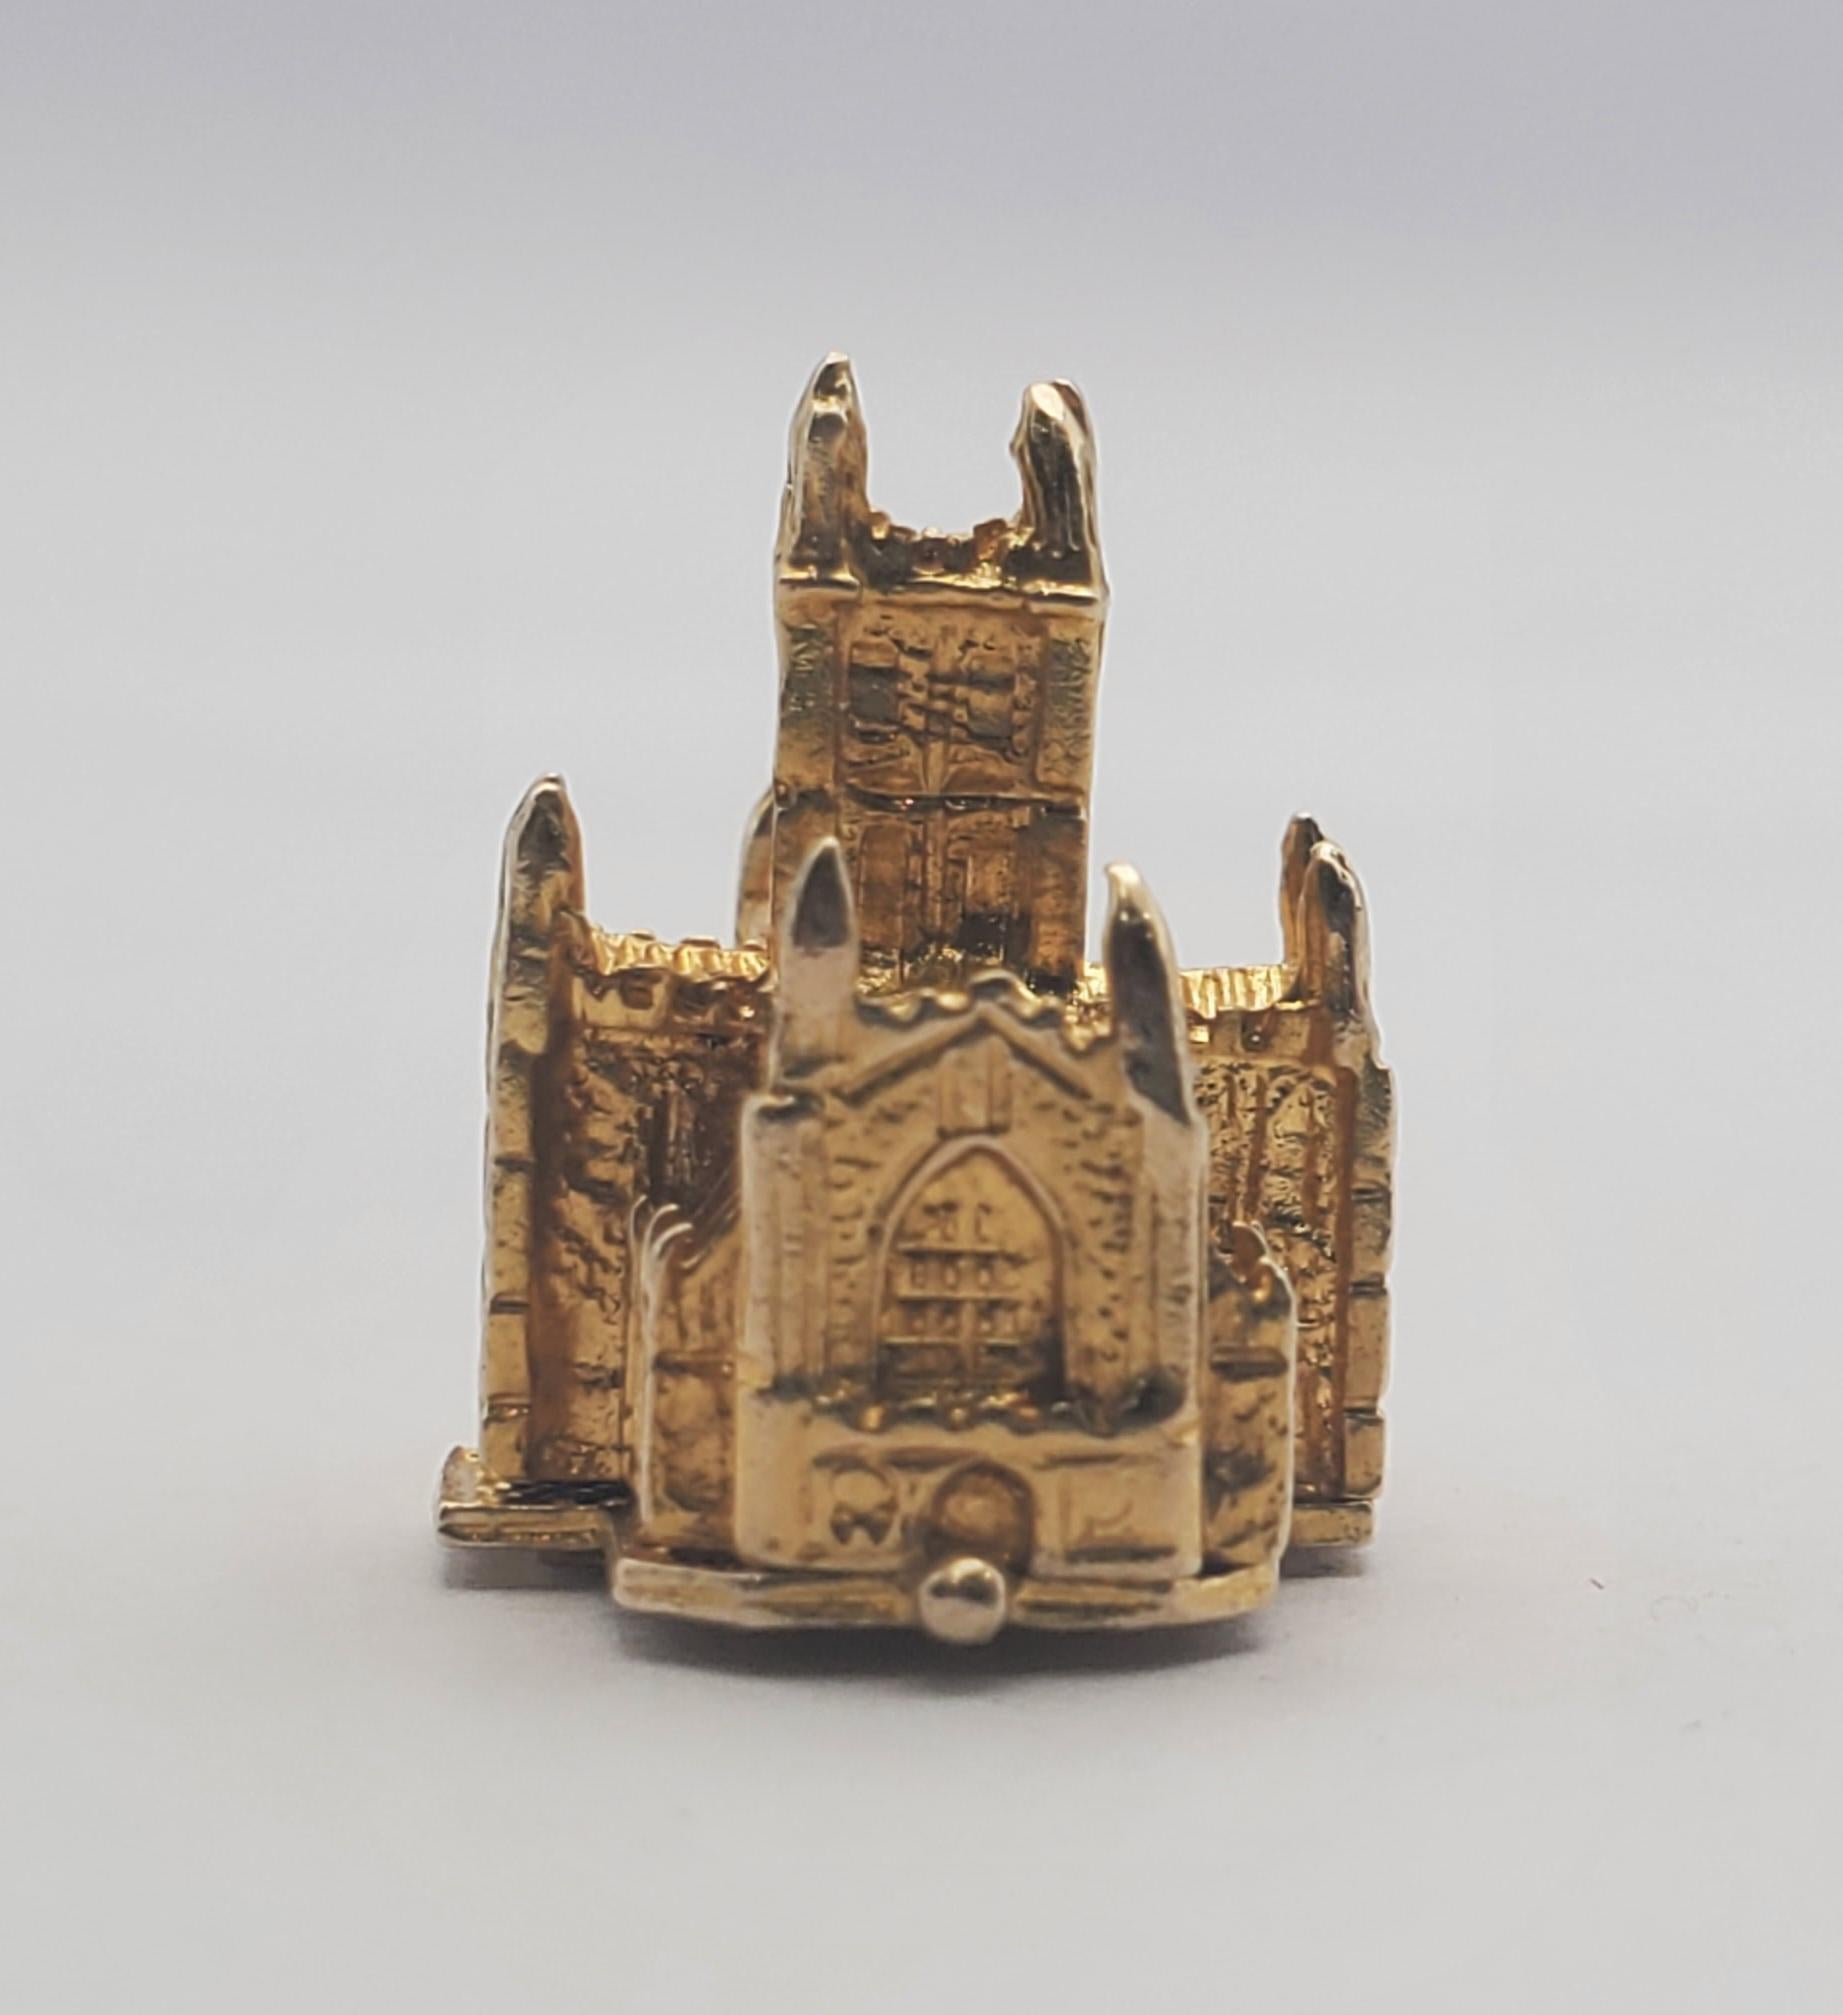 Ornately detailed 9K yellow gold cathedral charm featuring an adorable wedding scene hidden within. The cathedral design is of Hereford Cathedral, located on the western side of the UK in Hereford, Herefordshire. The cathedral is one of the UK's